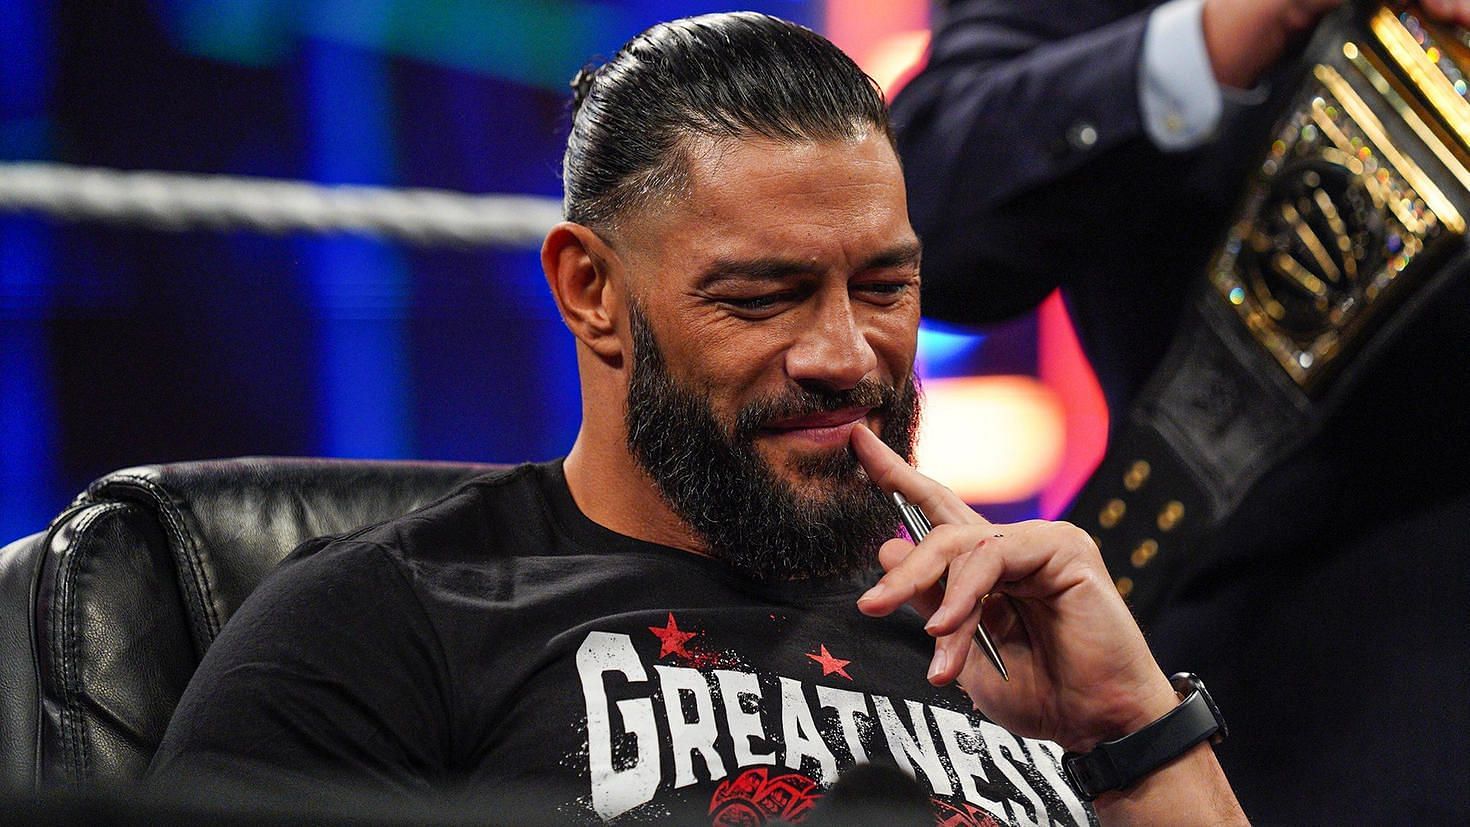 Roman Reigns was on SmackDown this week